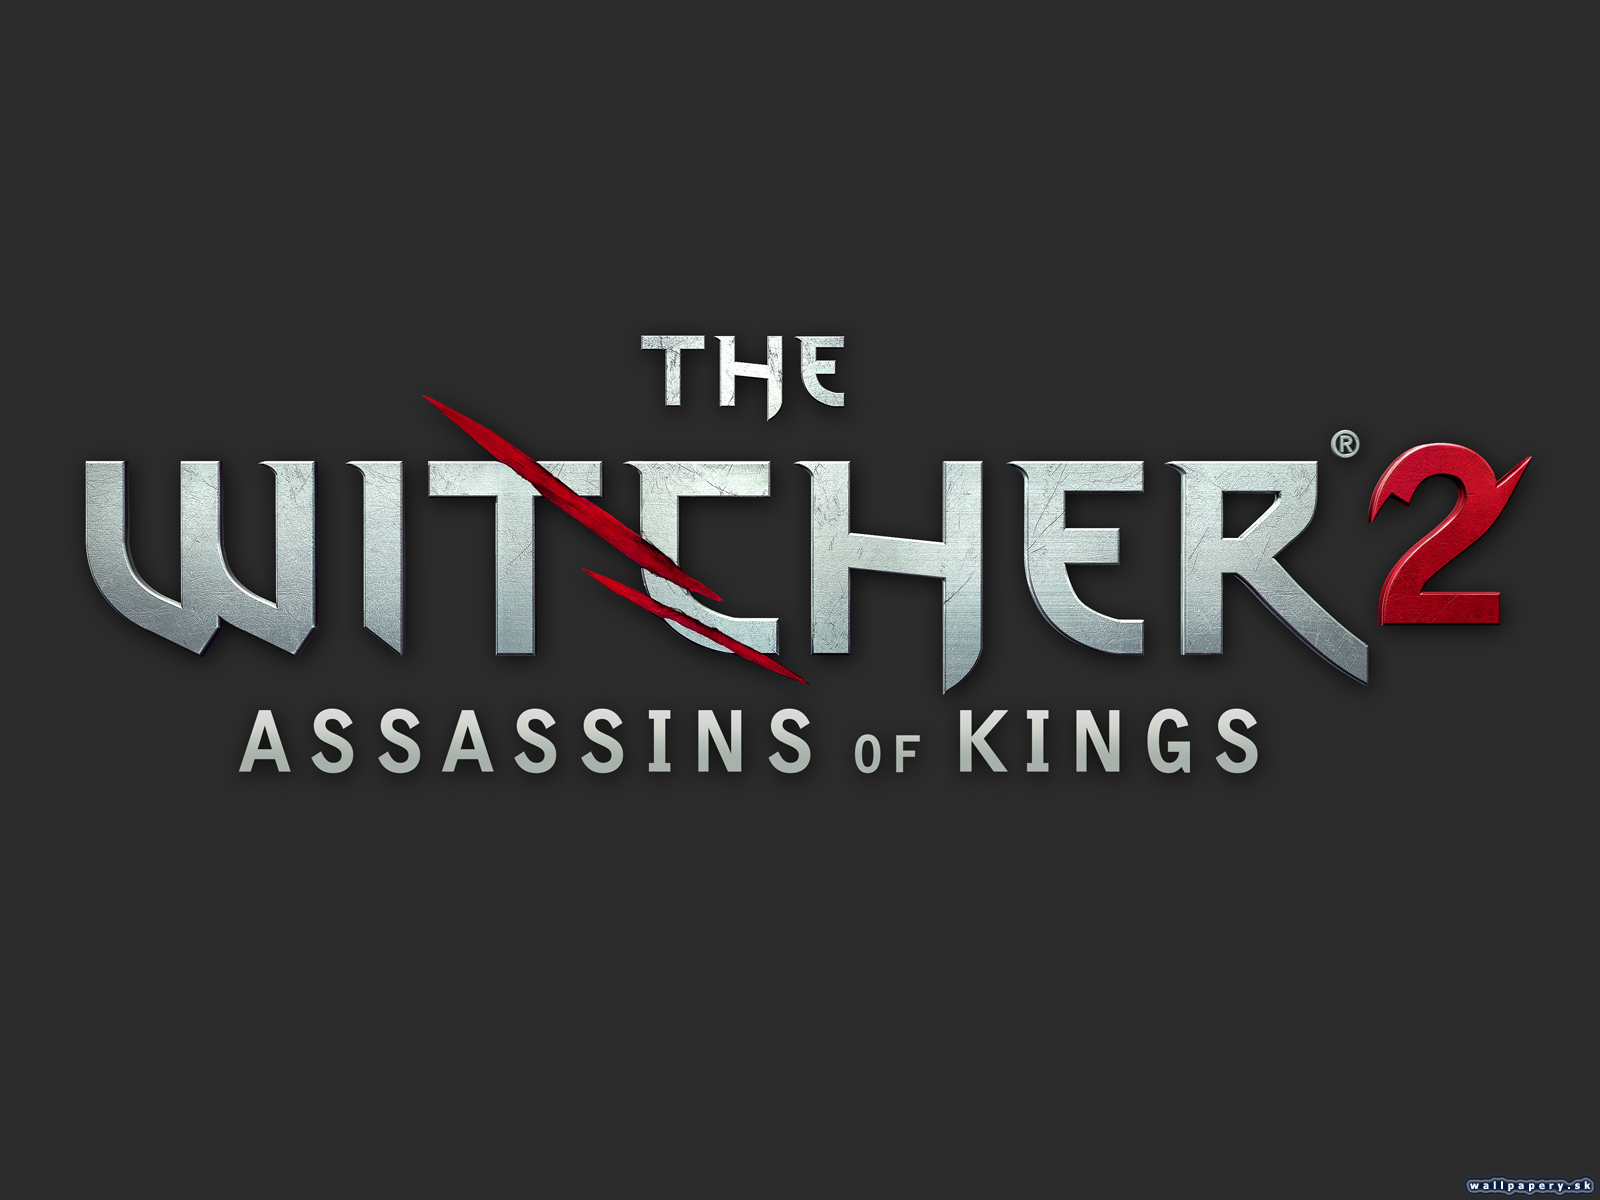 The Witcher 2: Assassins of Kings - wallpaper 4